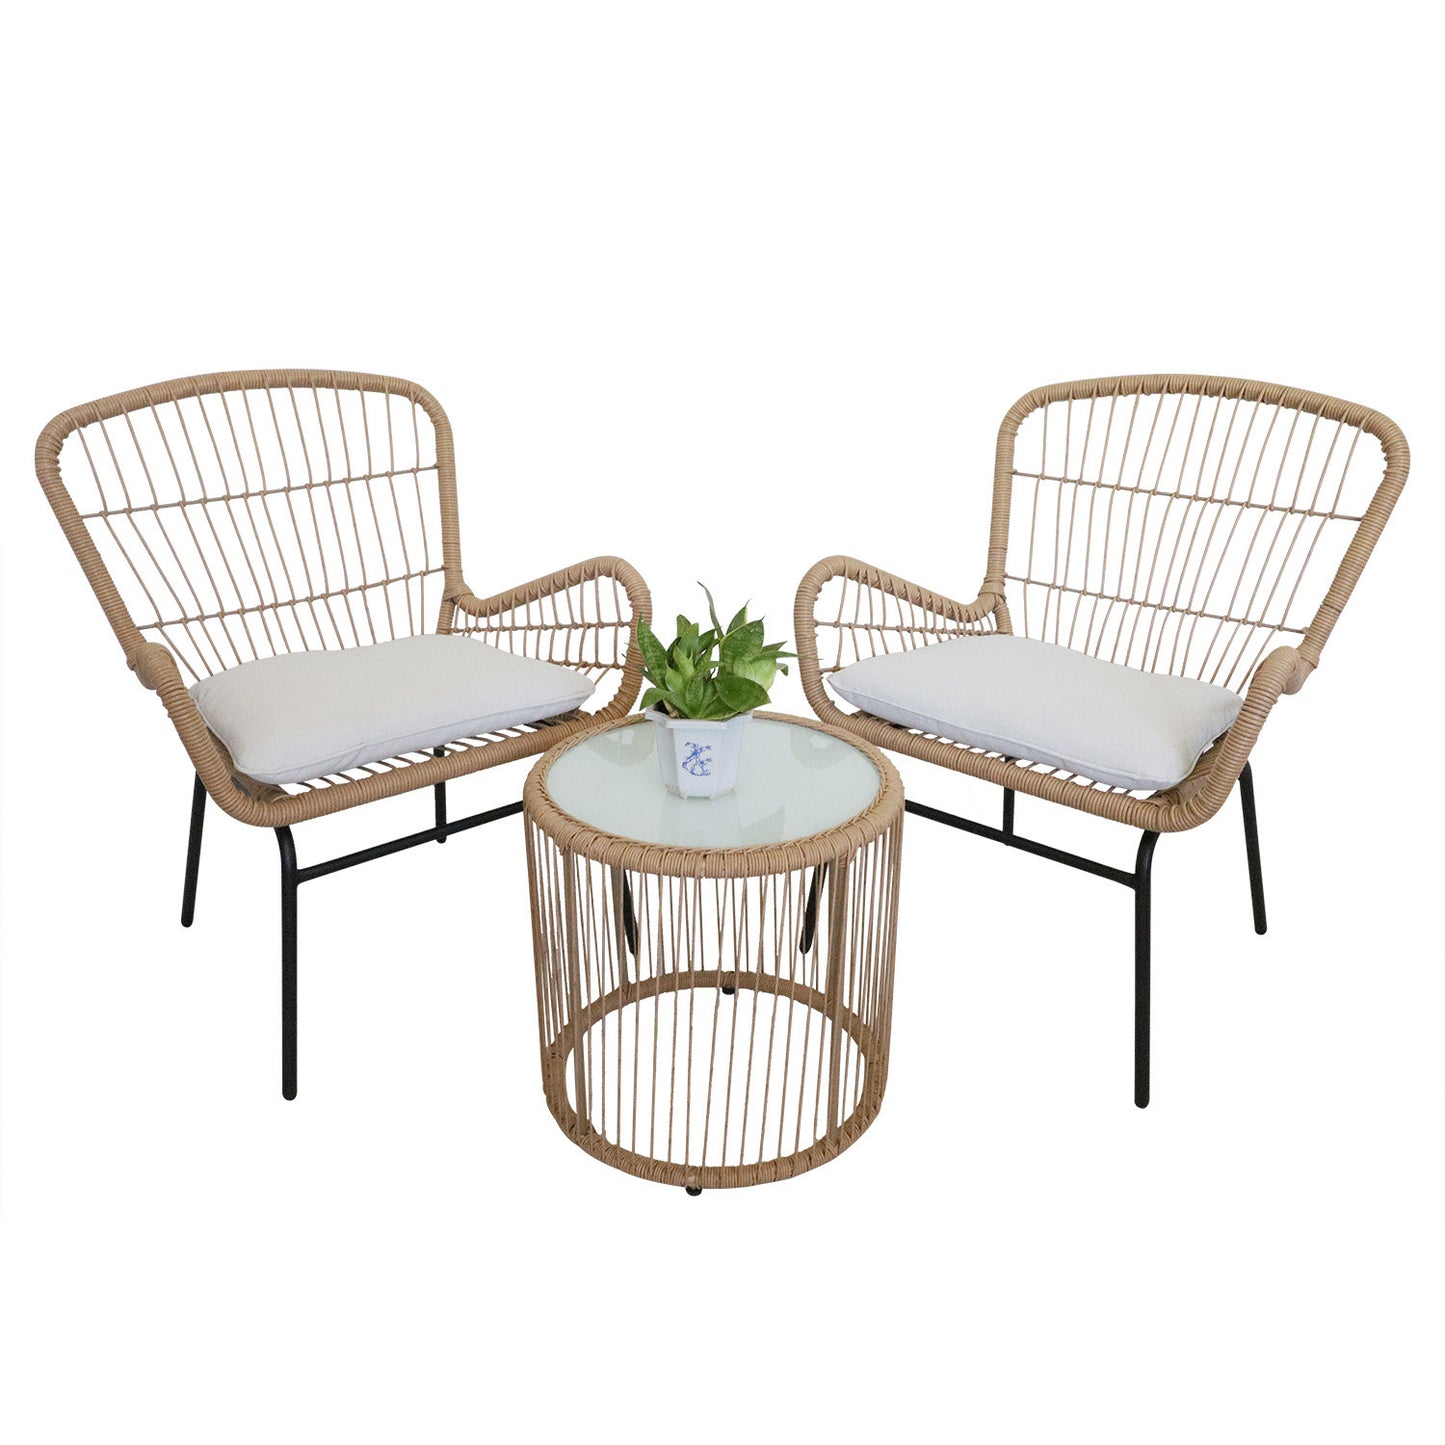 Patio Chairs with Glass Top Table